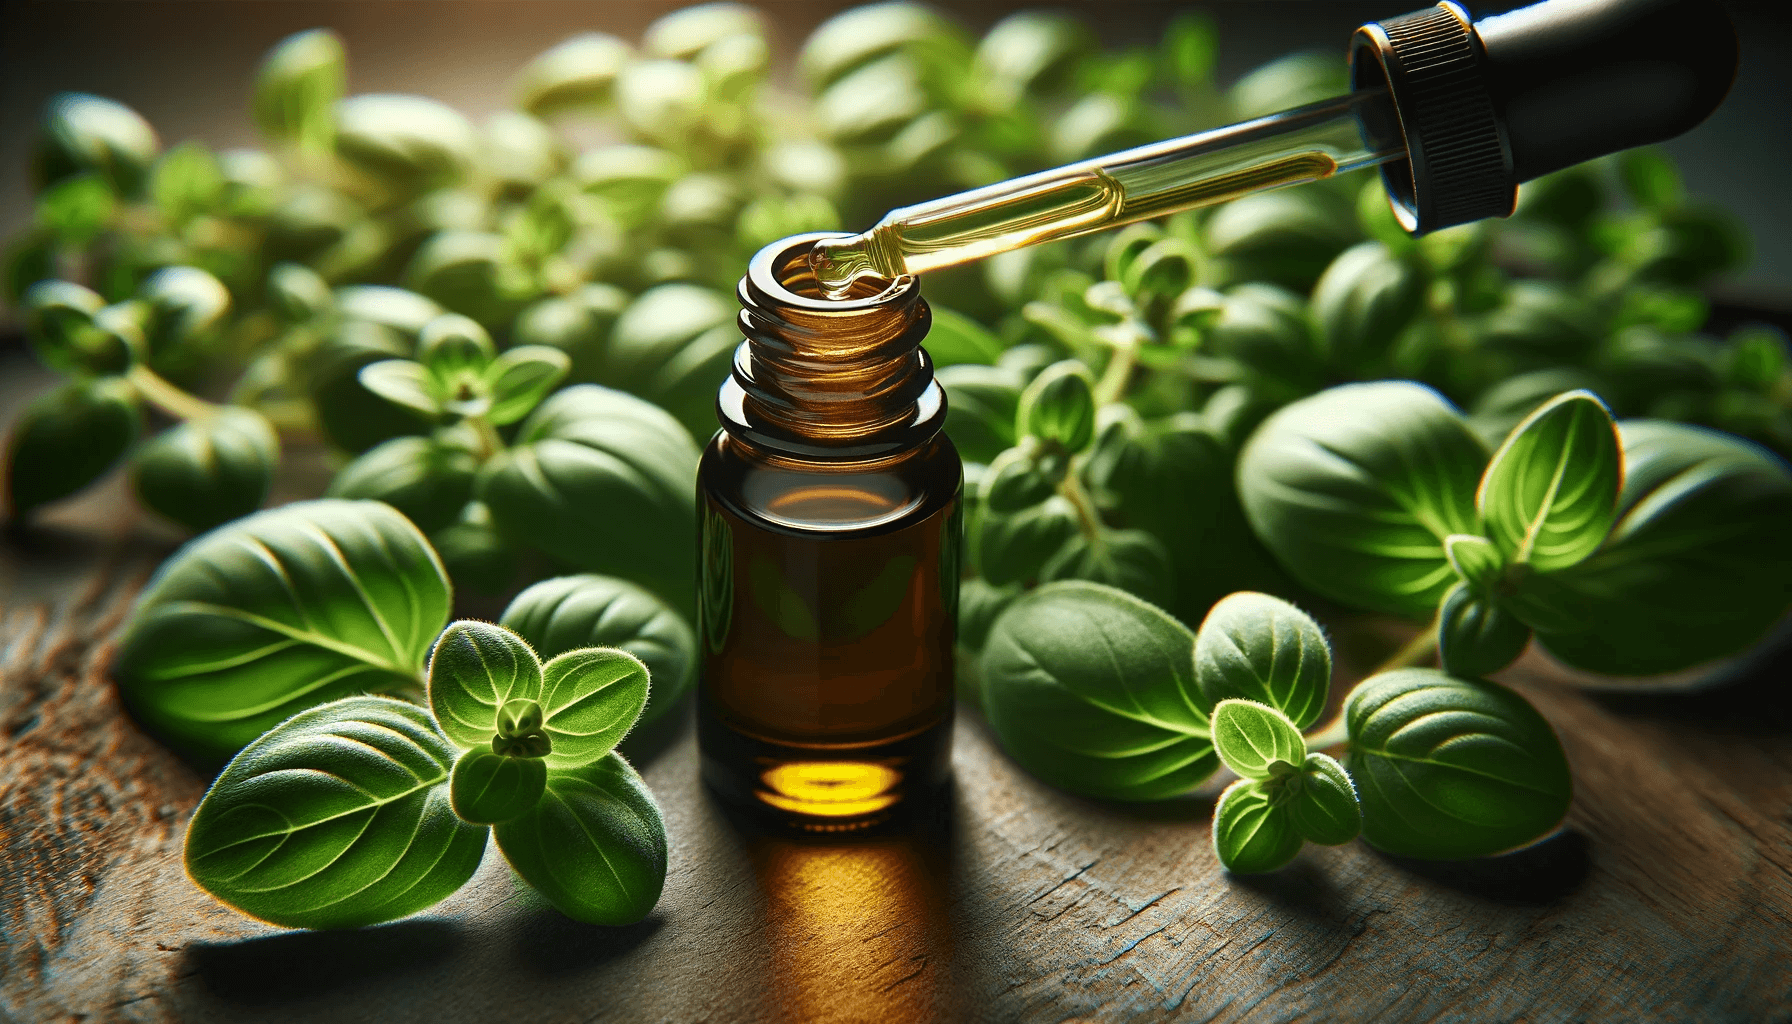 Open bottle of oregano oil with a dropper on a background of fresh oregano leaves.